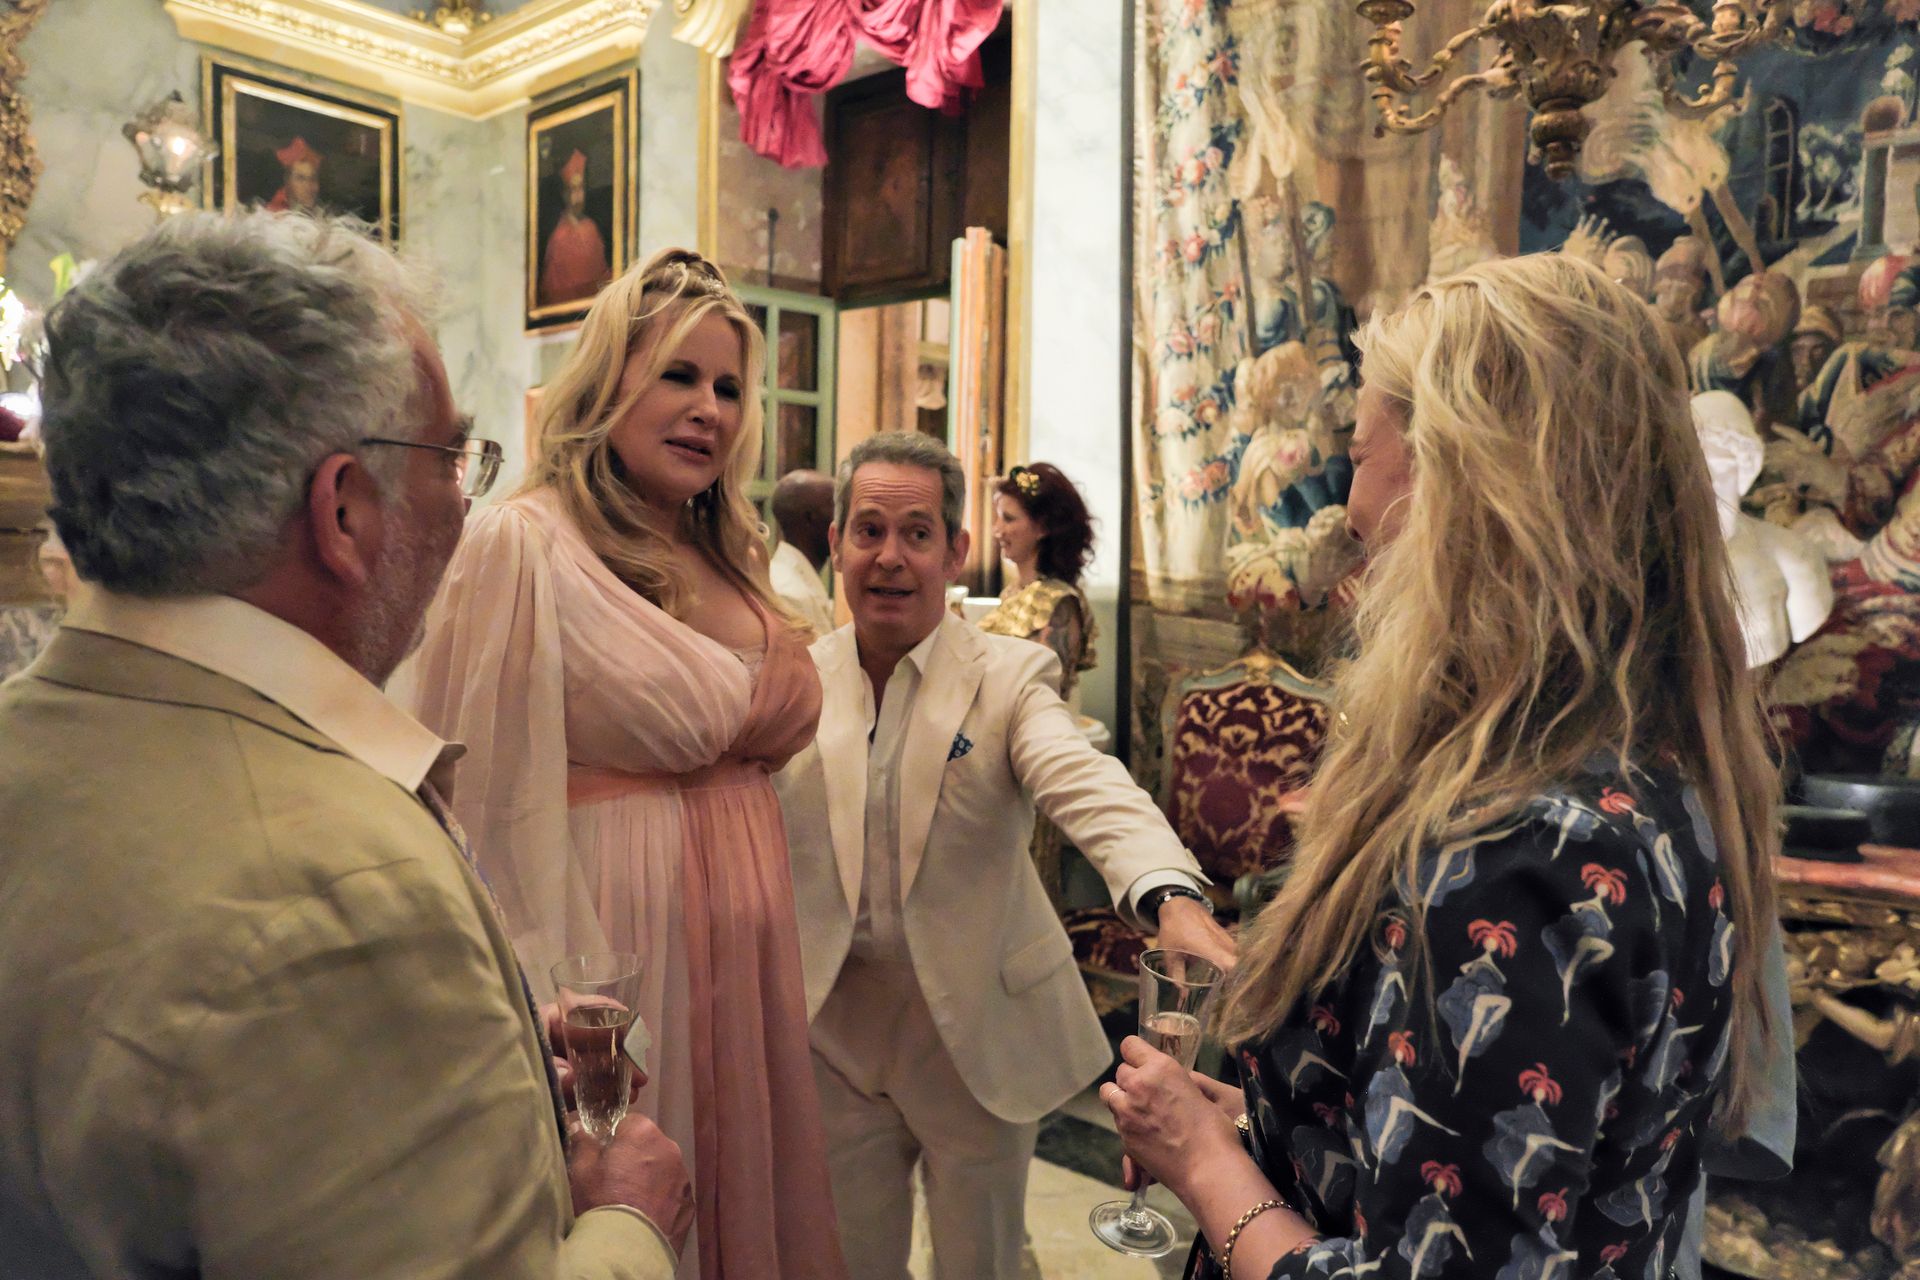 Jennifer Coolidge Still Rules, But Tanya Is the Weak Link in The